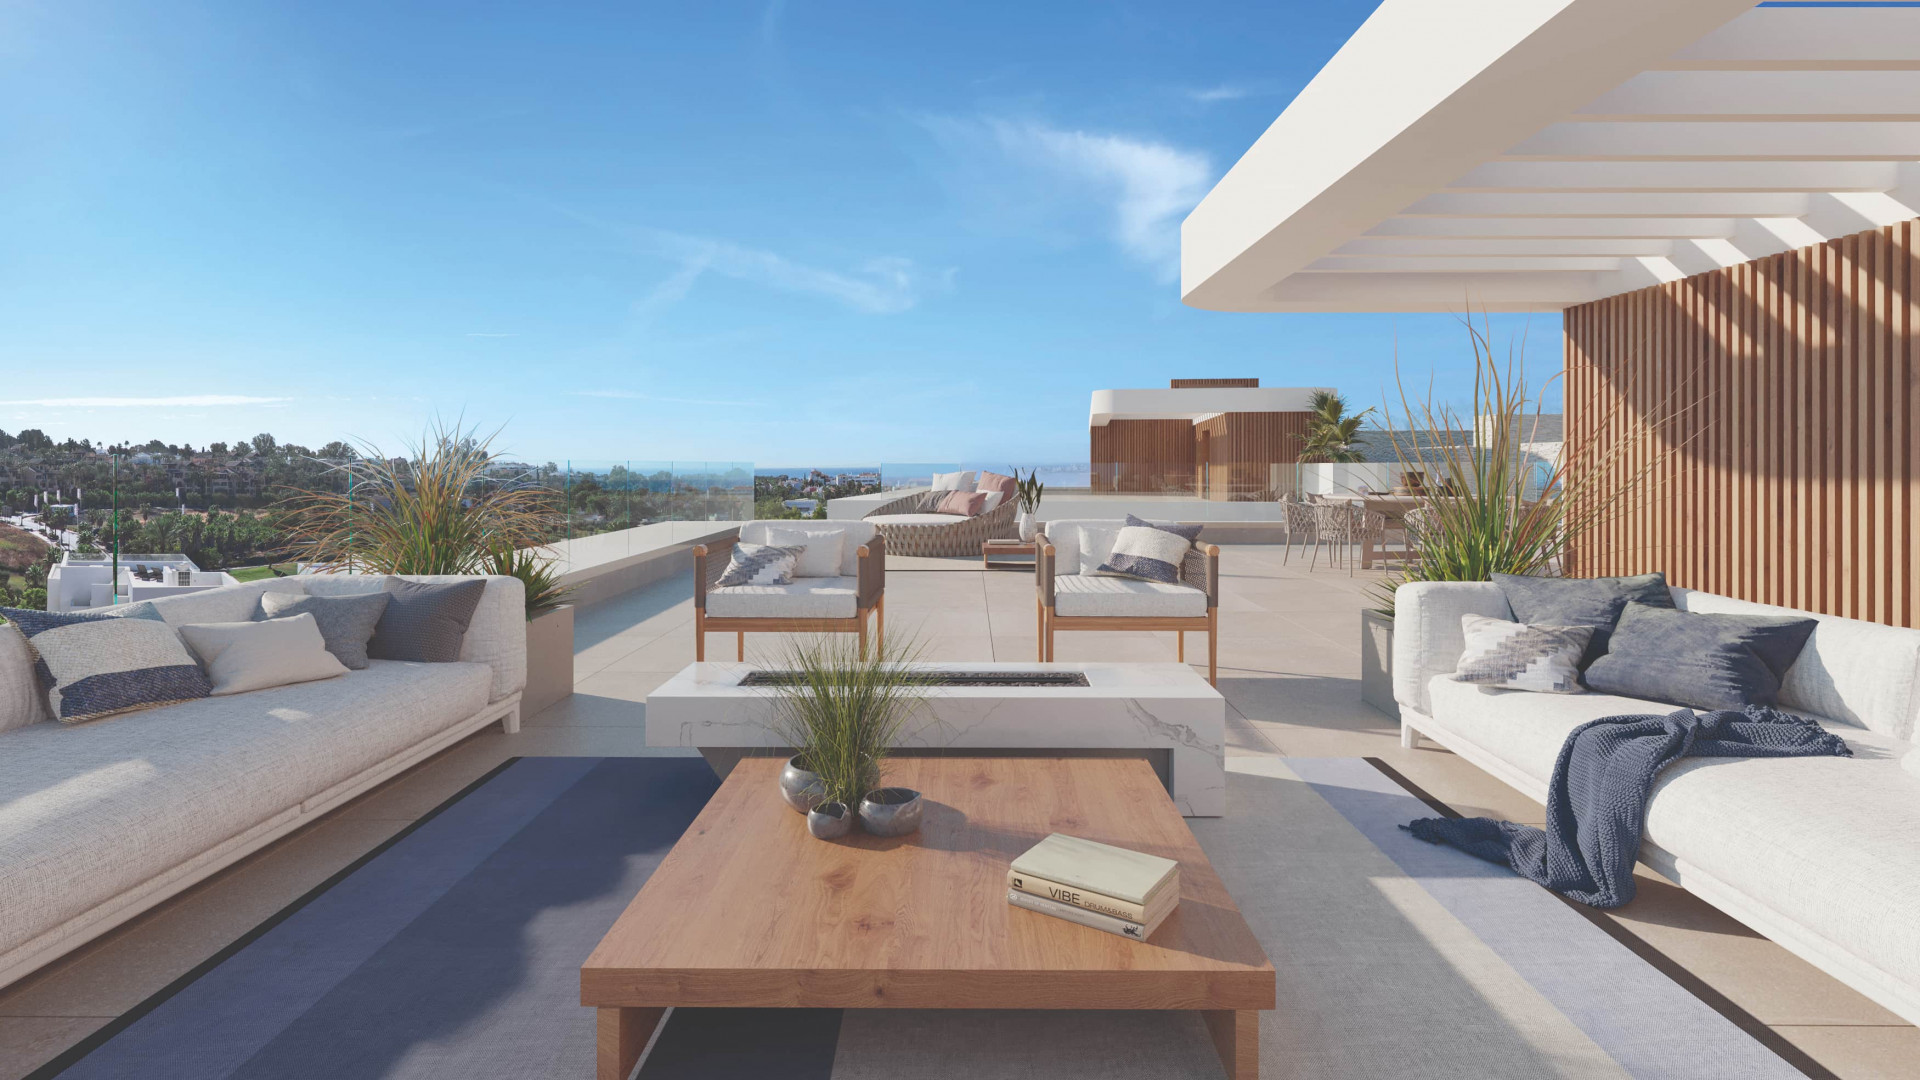 New development of 15 modern semi-detached homes in the exclusive and peaceful area of El Campanario